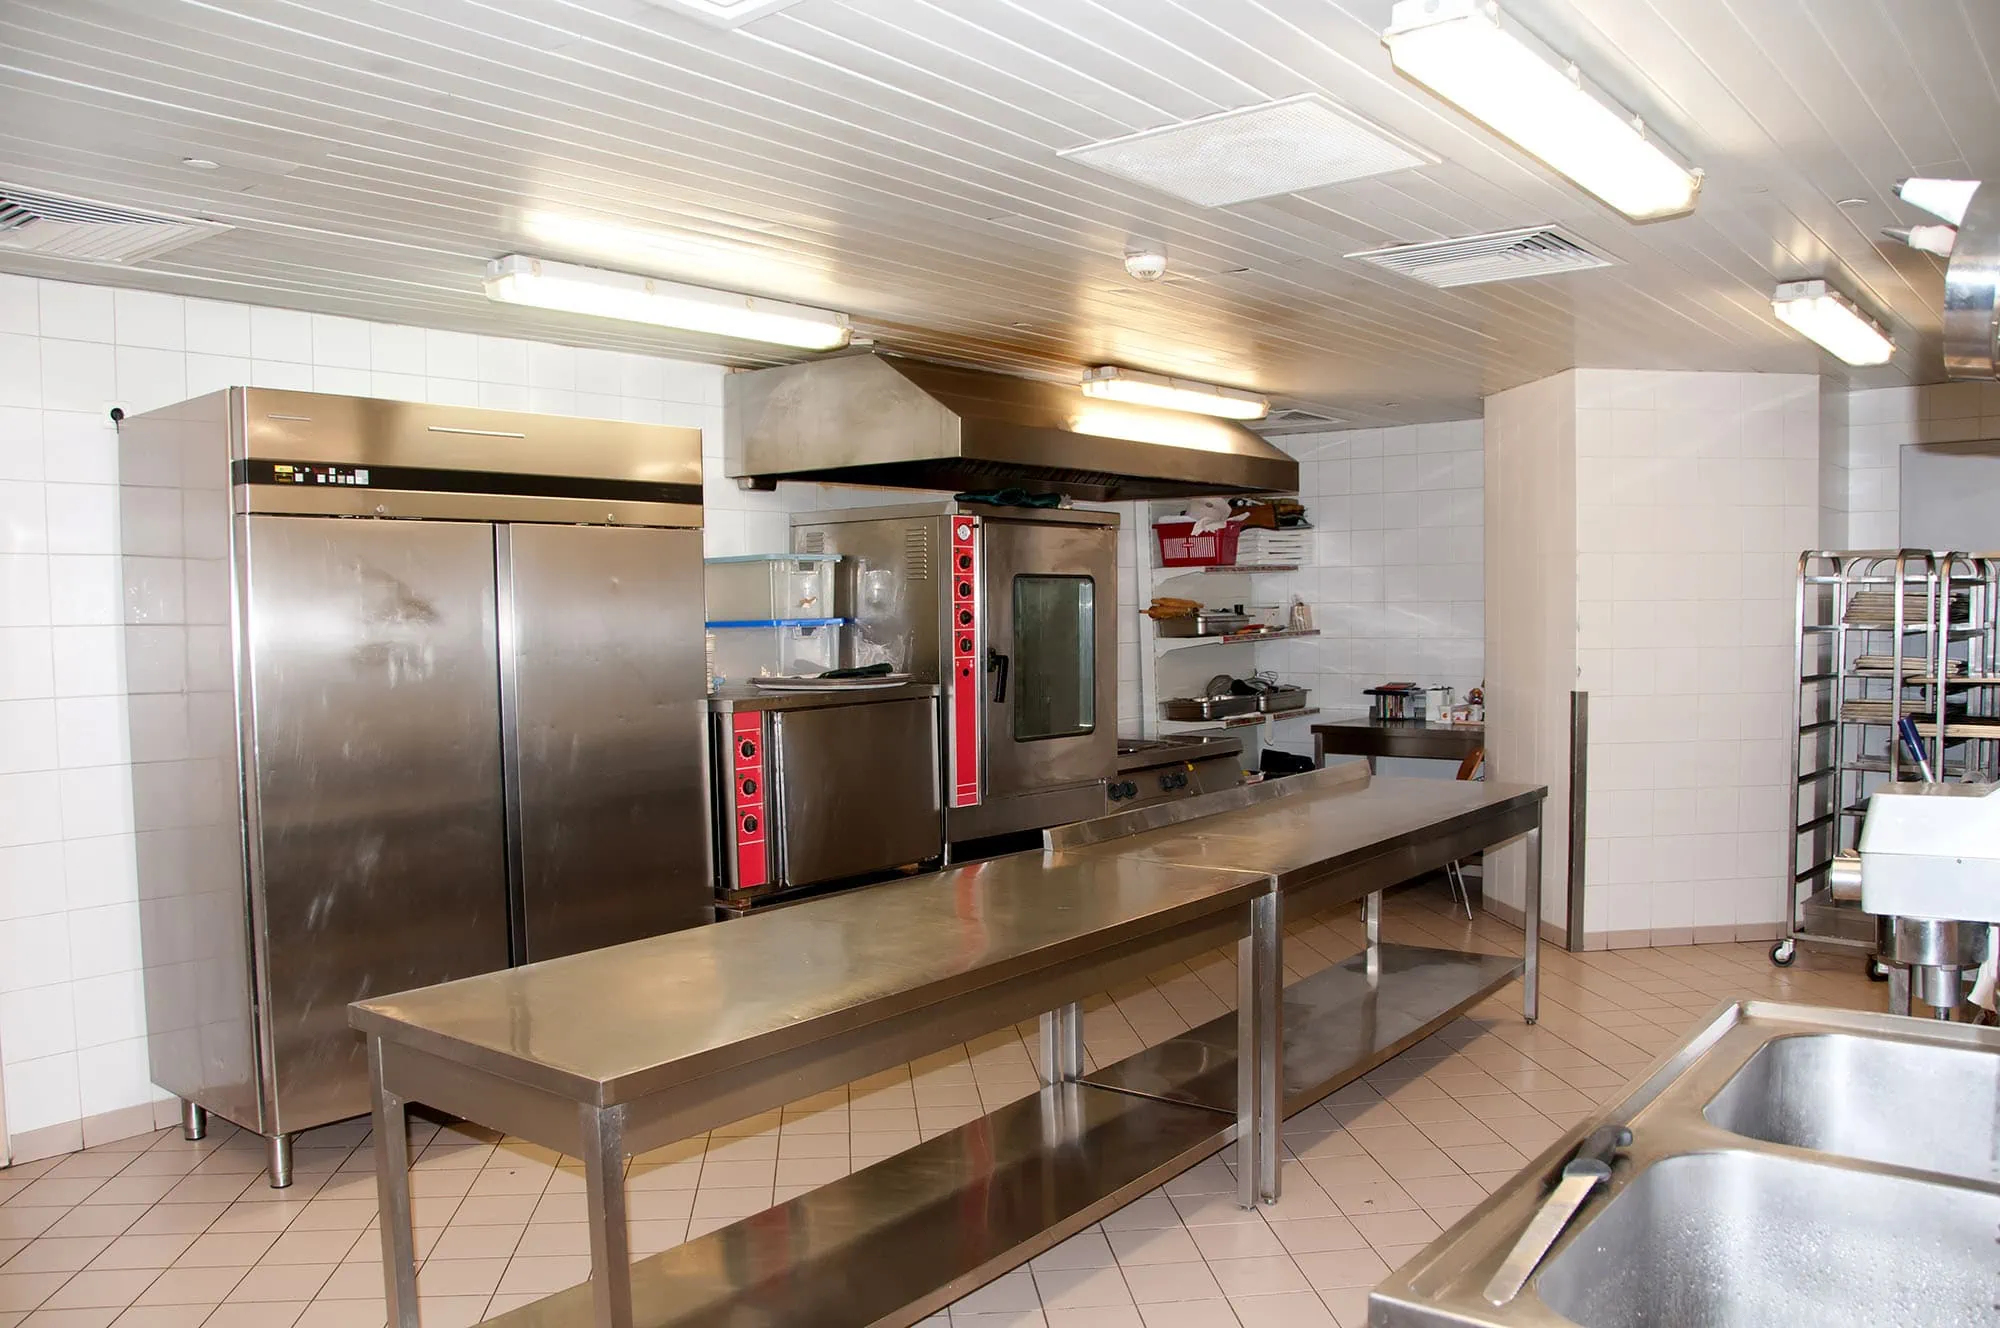 Restaurant kitchen with commercial fridge and appliances